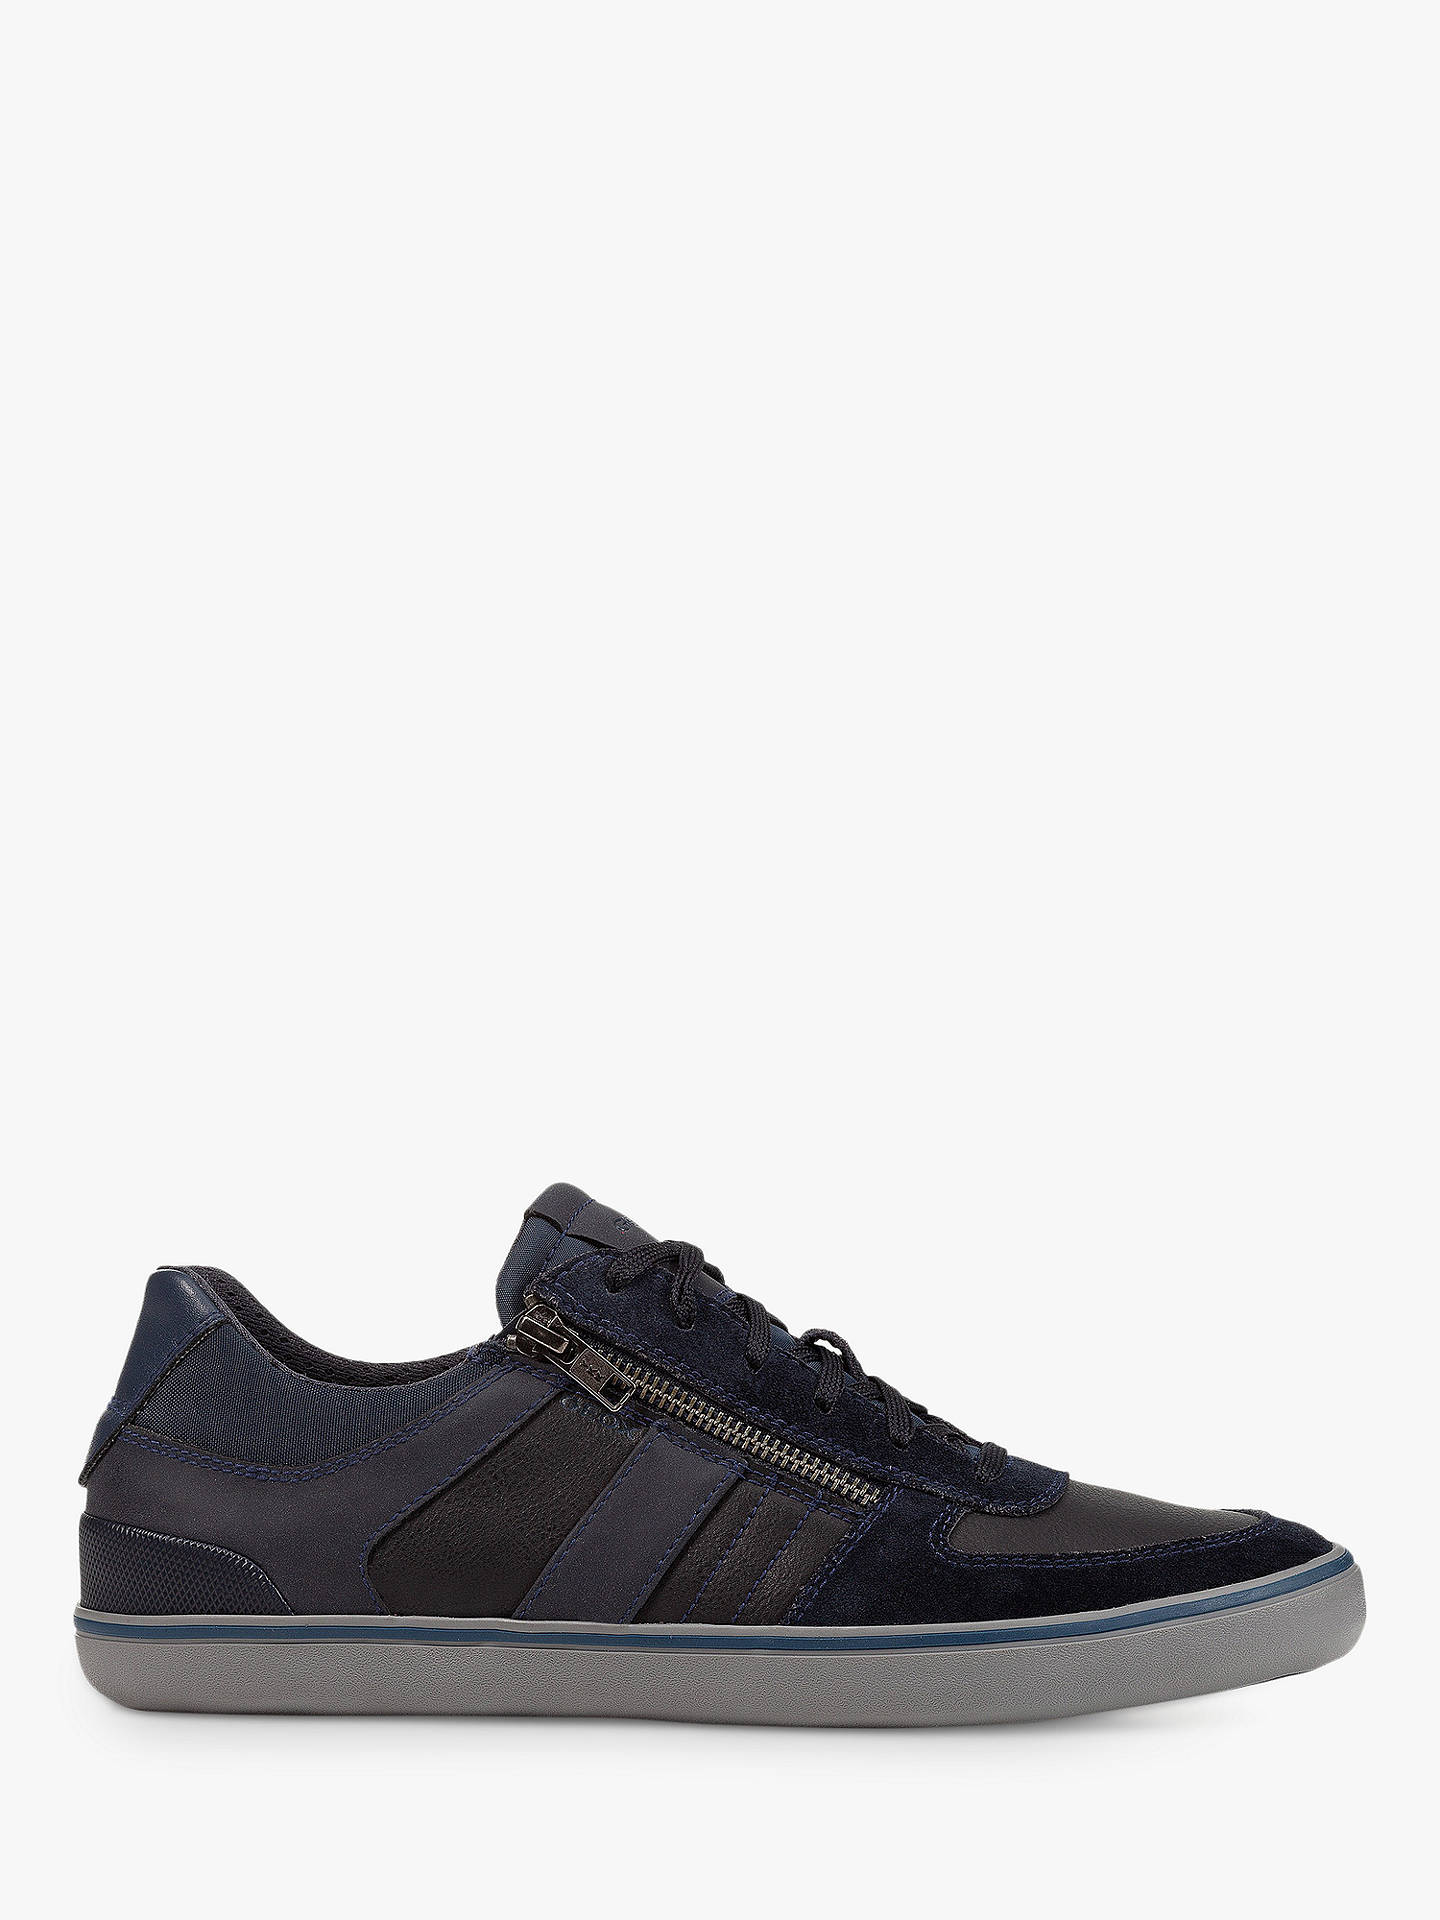 Geox Leather Zip Casual Shoes, Navy at John Lewis & Partners